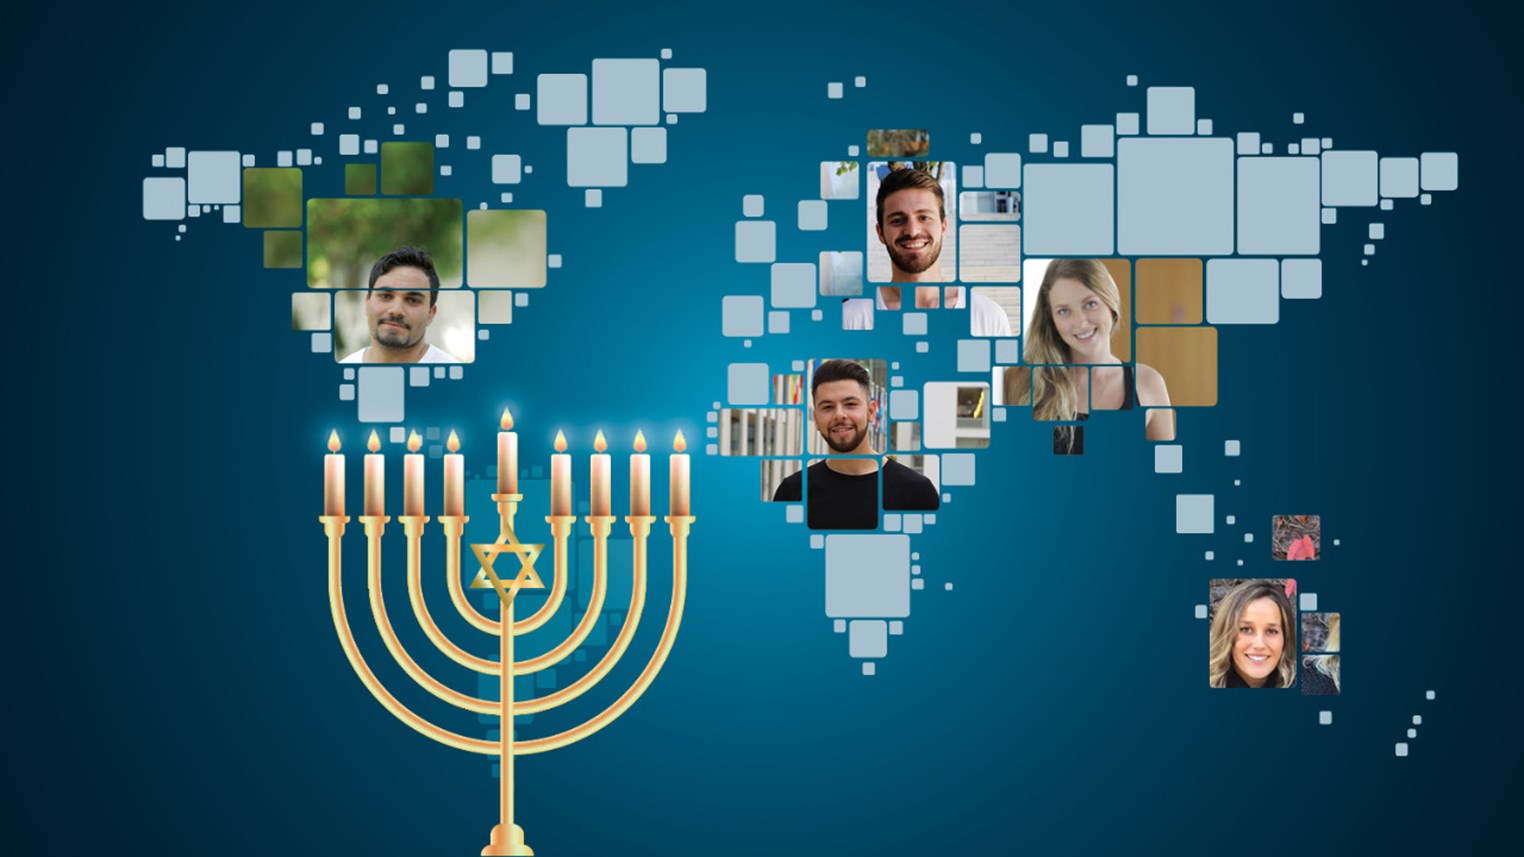 Hannukah map of the world picture with students faces on countries